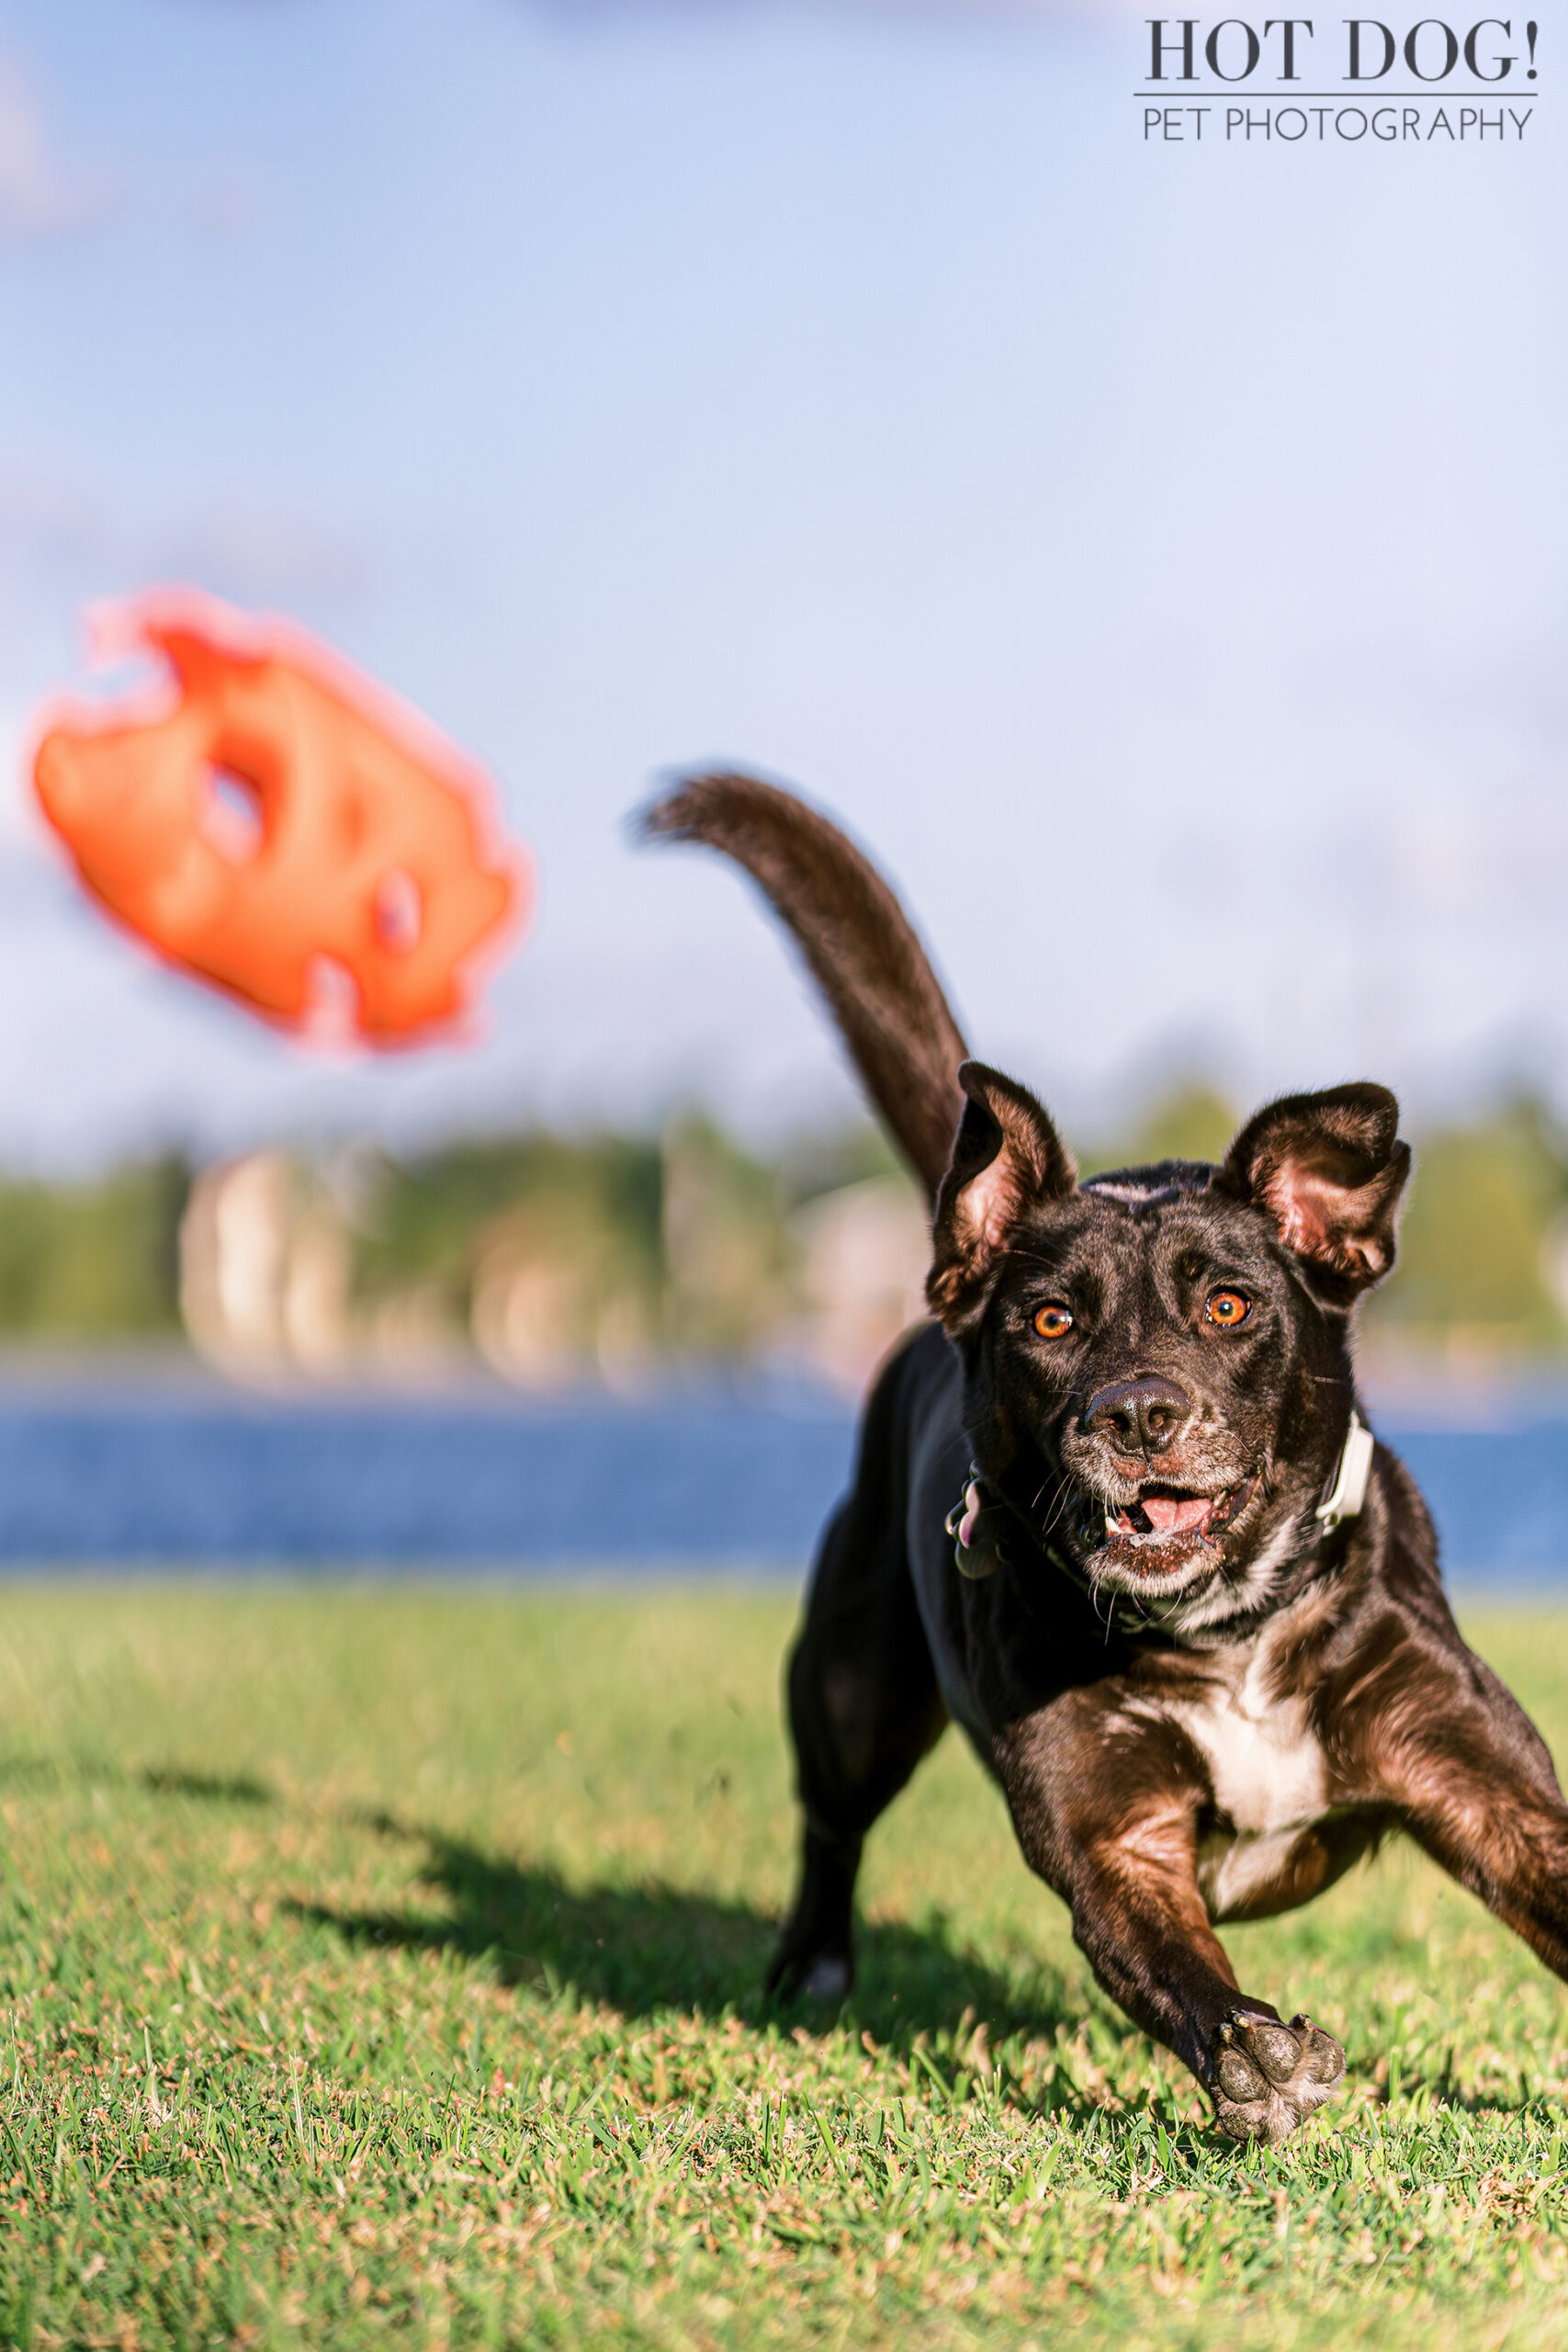 Roxie racing after her ball in mid air in College Park, Florida. Photo by Central Florida pet photographer Hot Dog! Pet Photography